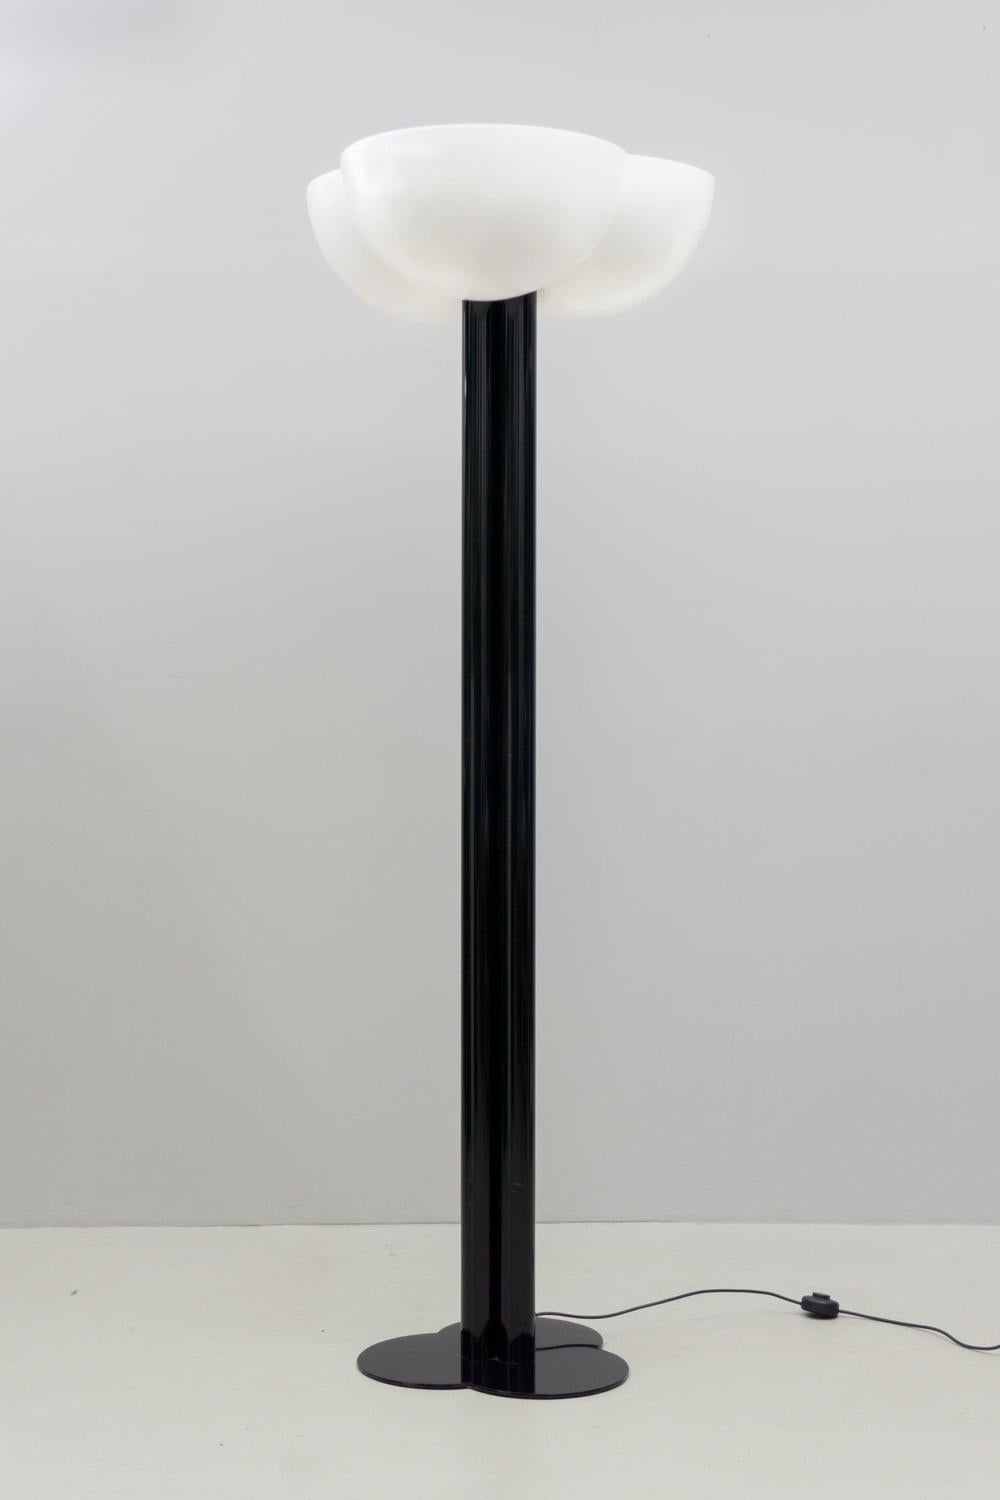 This impressive floor lamp is made of black enameled metal, it's reflector has three convexities and is made of white, translucid acrylic. 
_
'Sergio Asti (born 1926) is an Italian designer and architect, primarily known for his Industrial designs